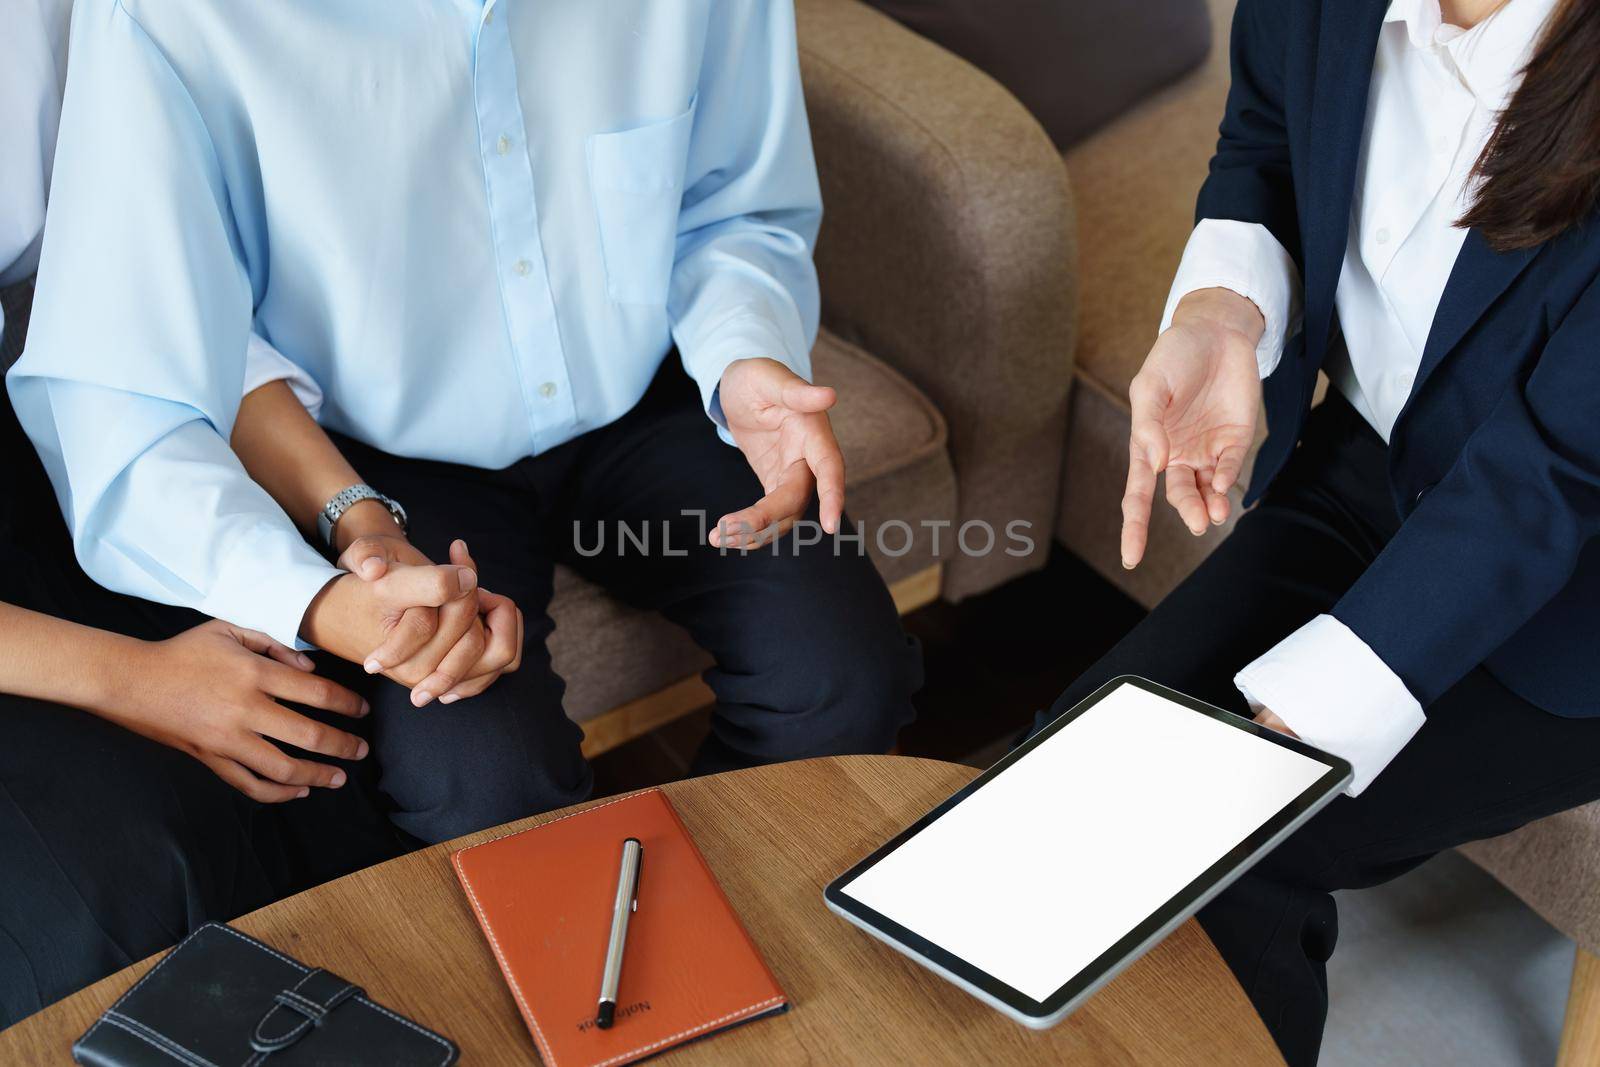 Bank employee holding tablets for customers to see solutions in choosing investments.